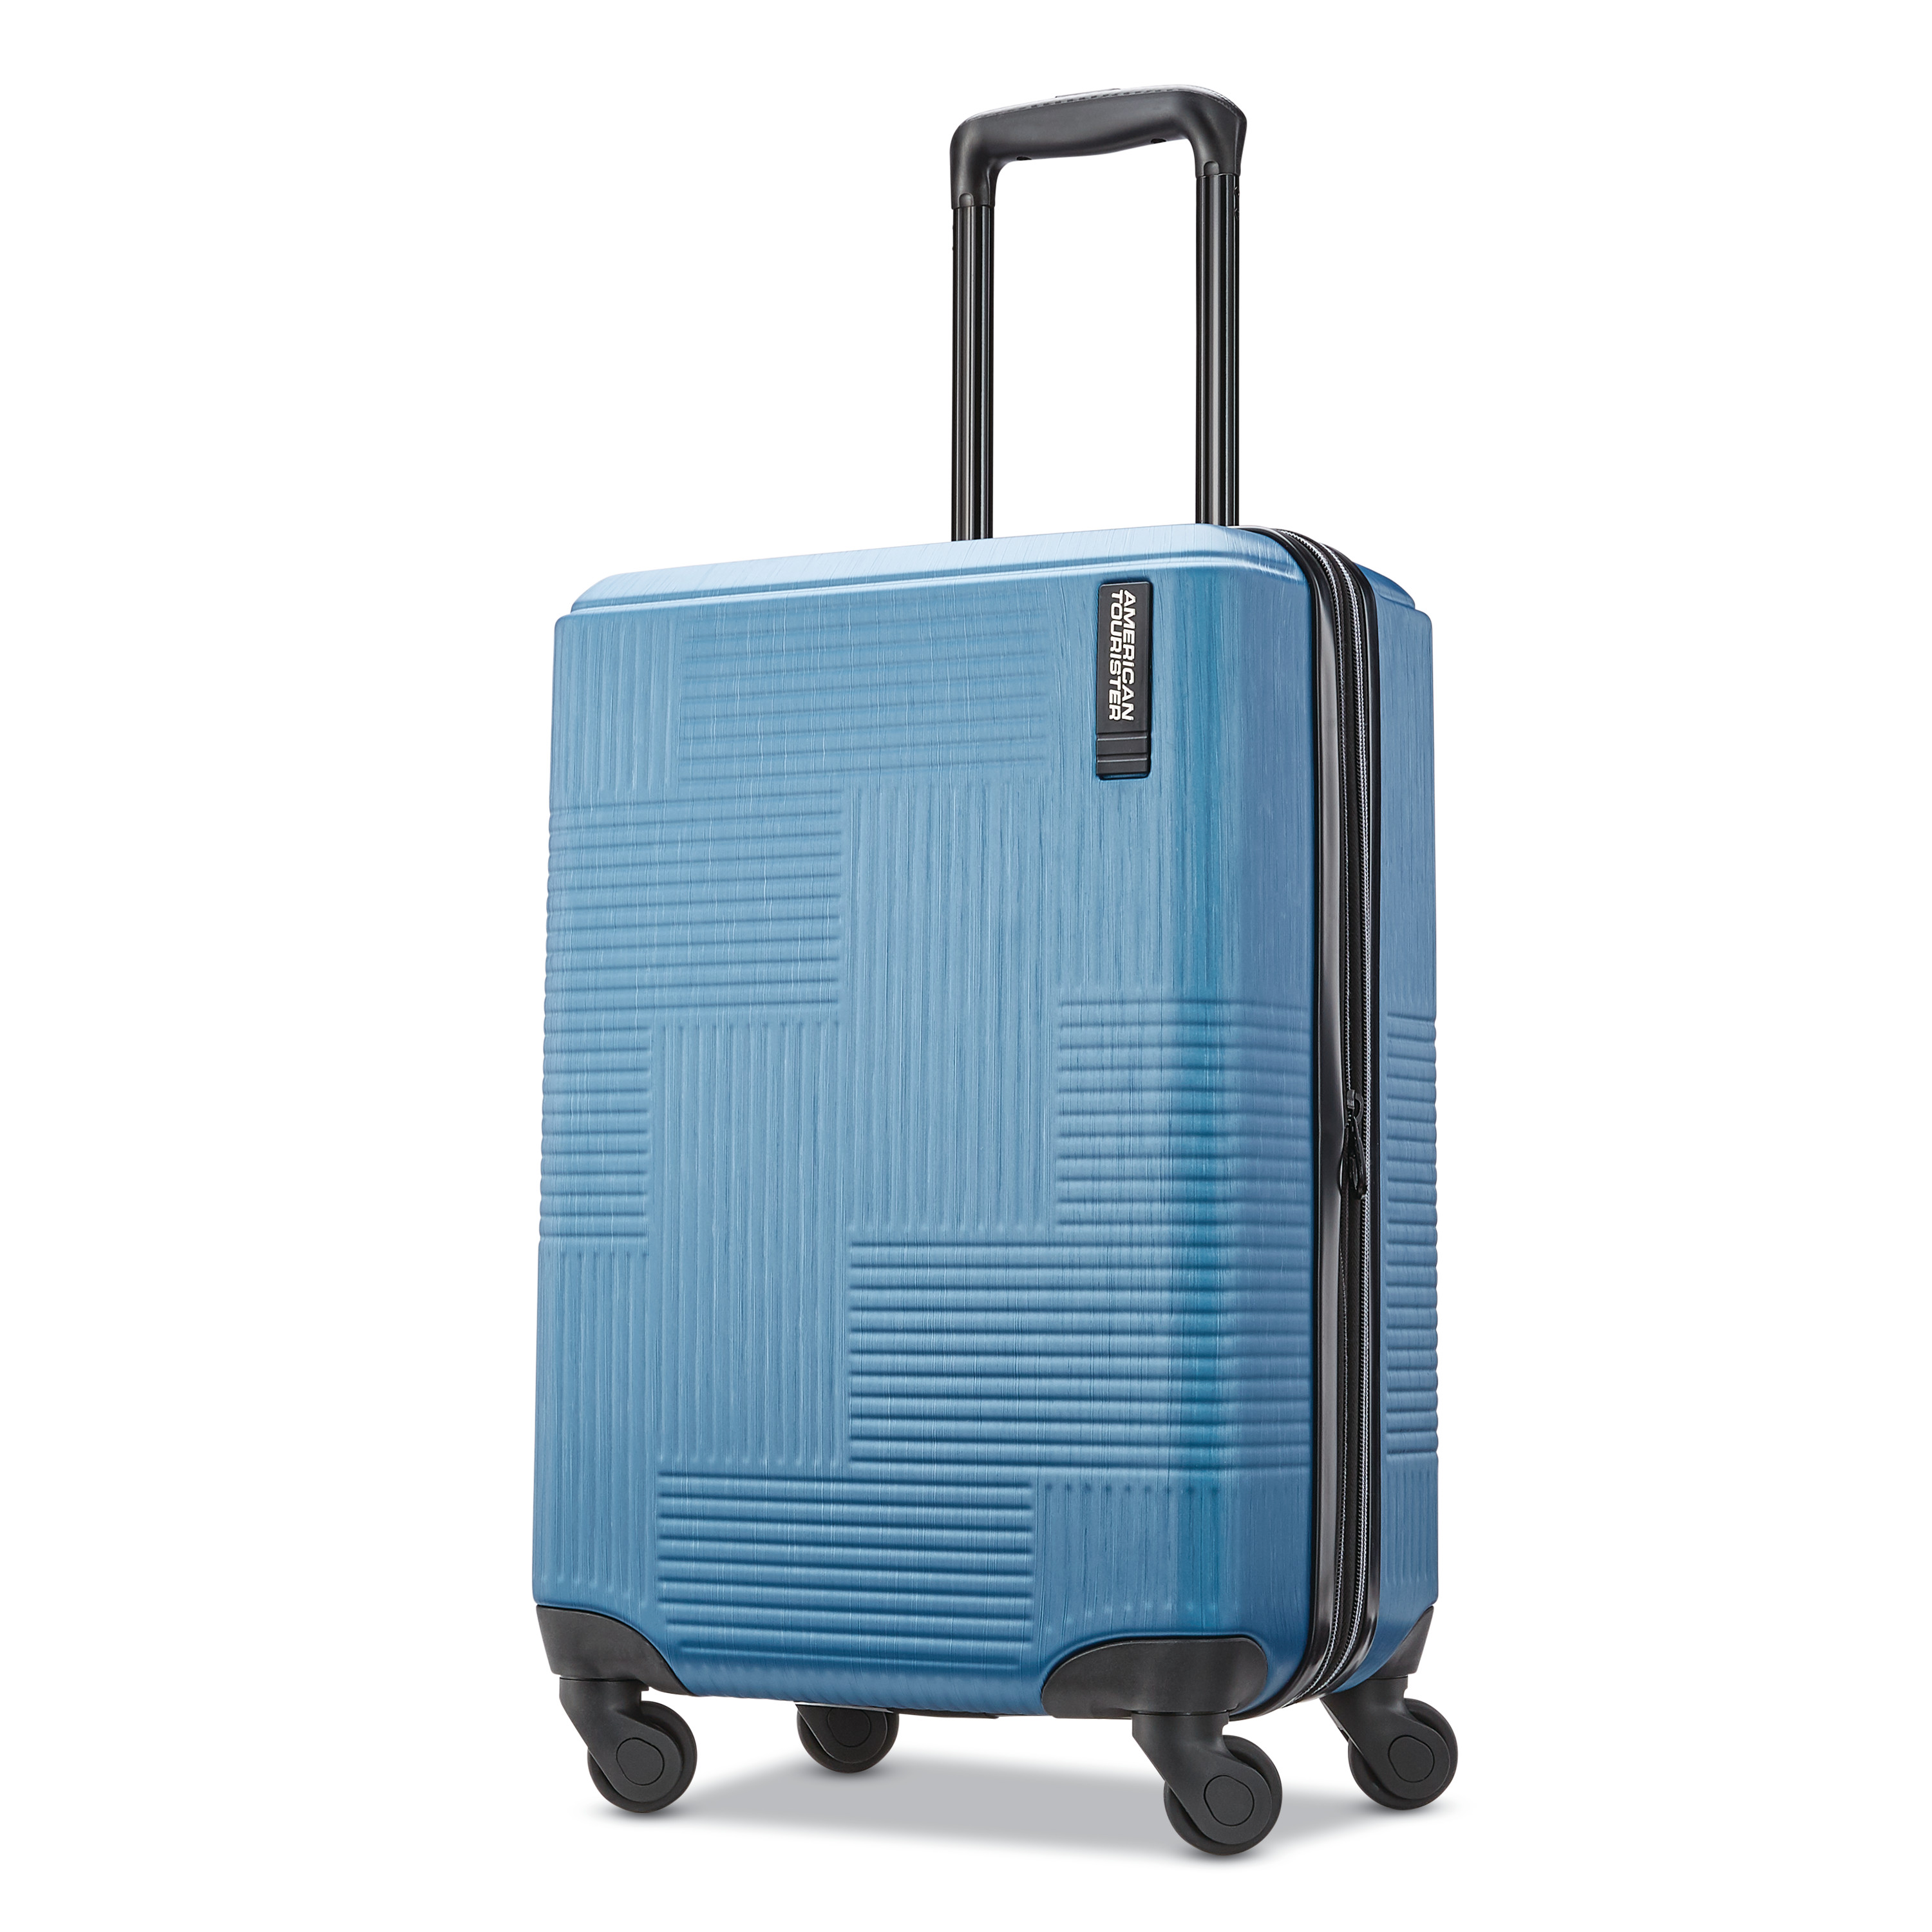 Bright Silver American Tourister Stratum XLT Expandable Hardside Luggage with Spinner Wheels 